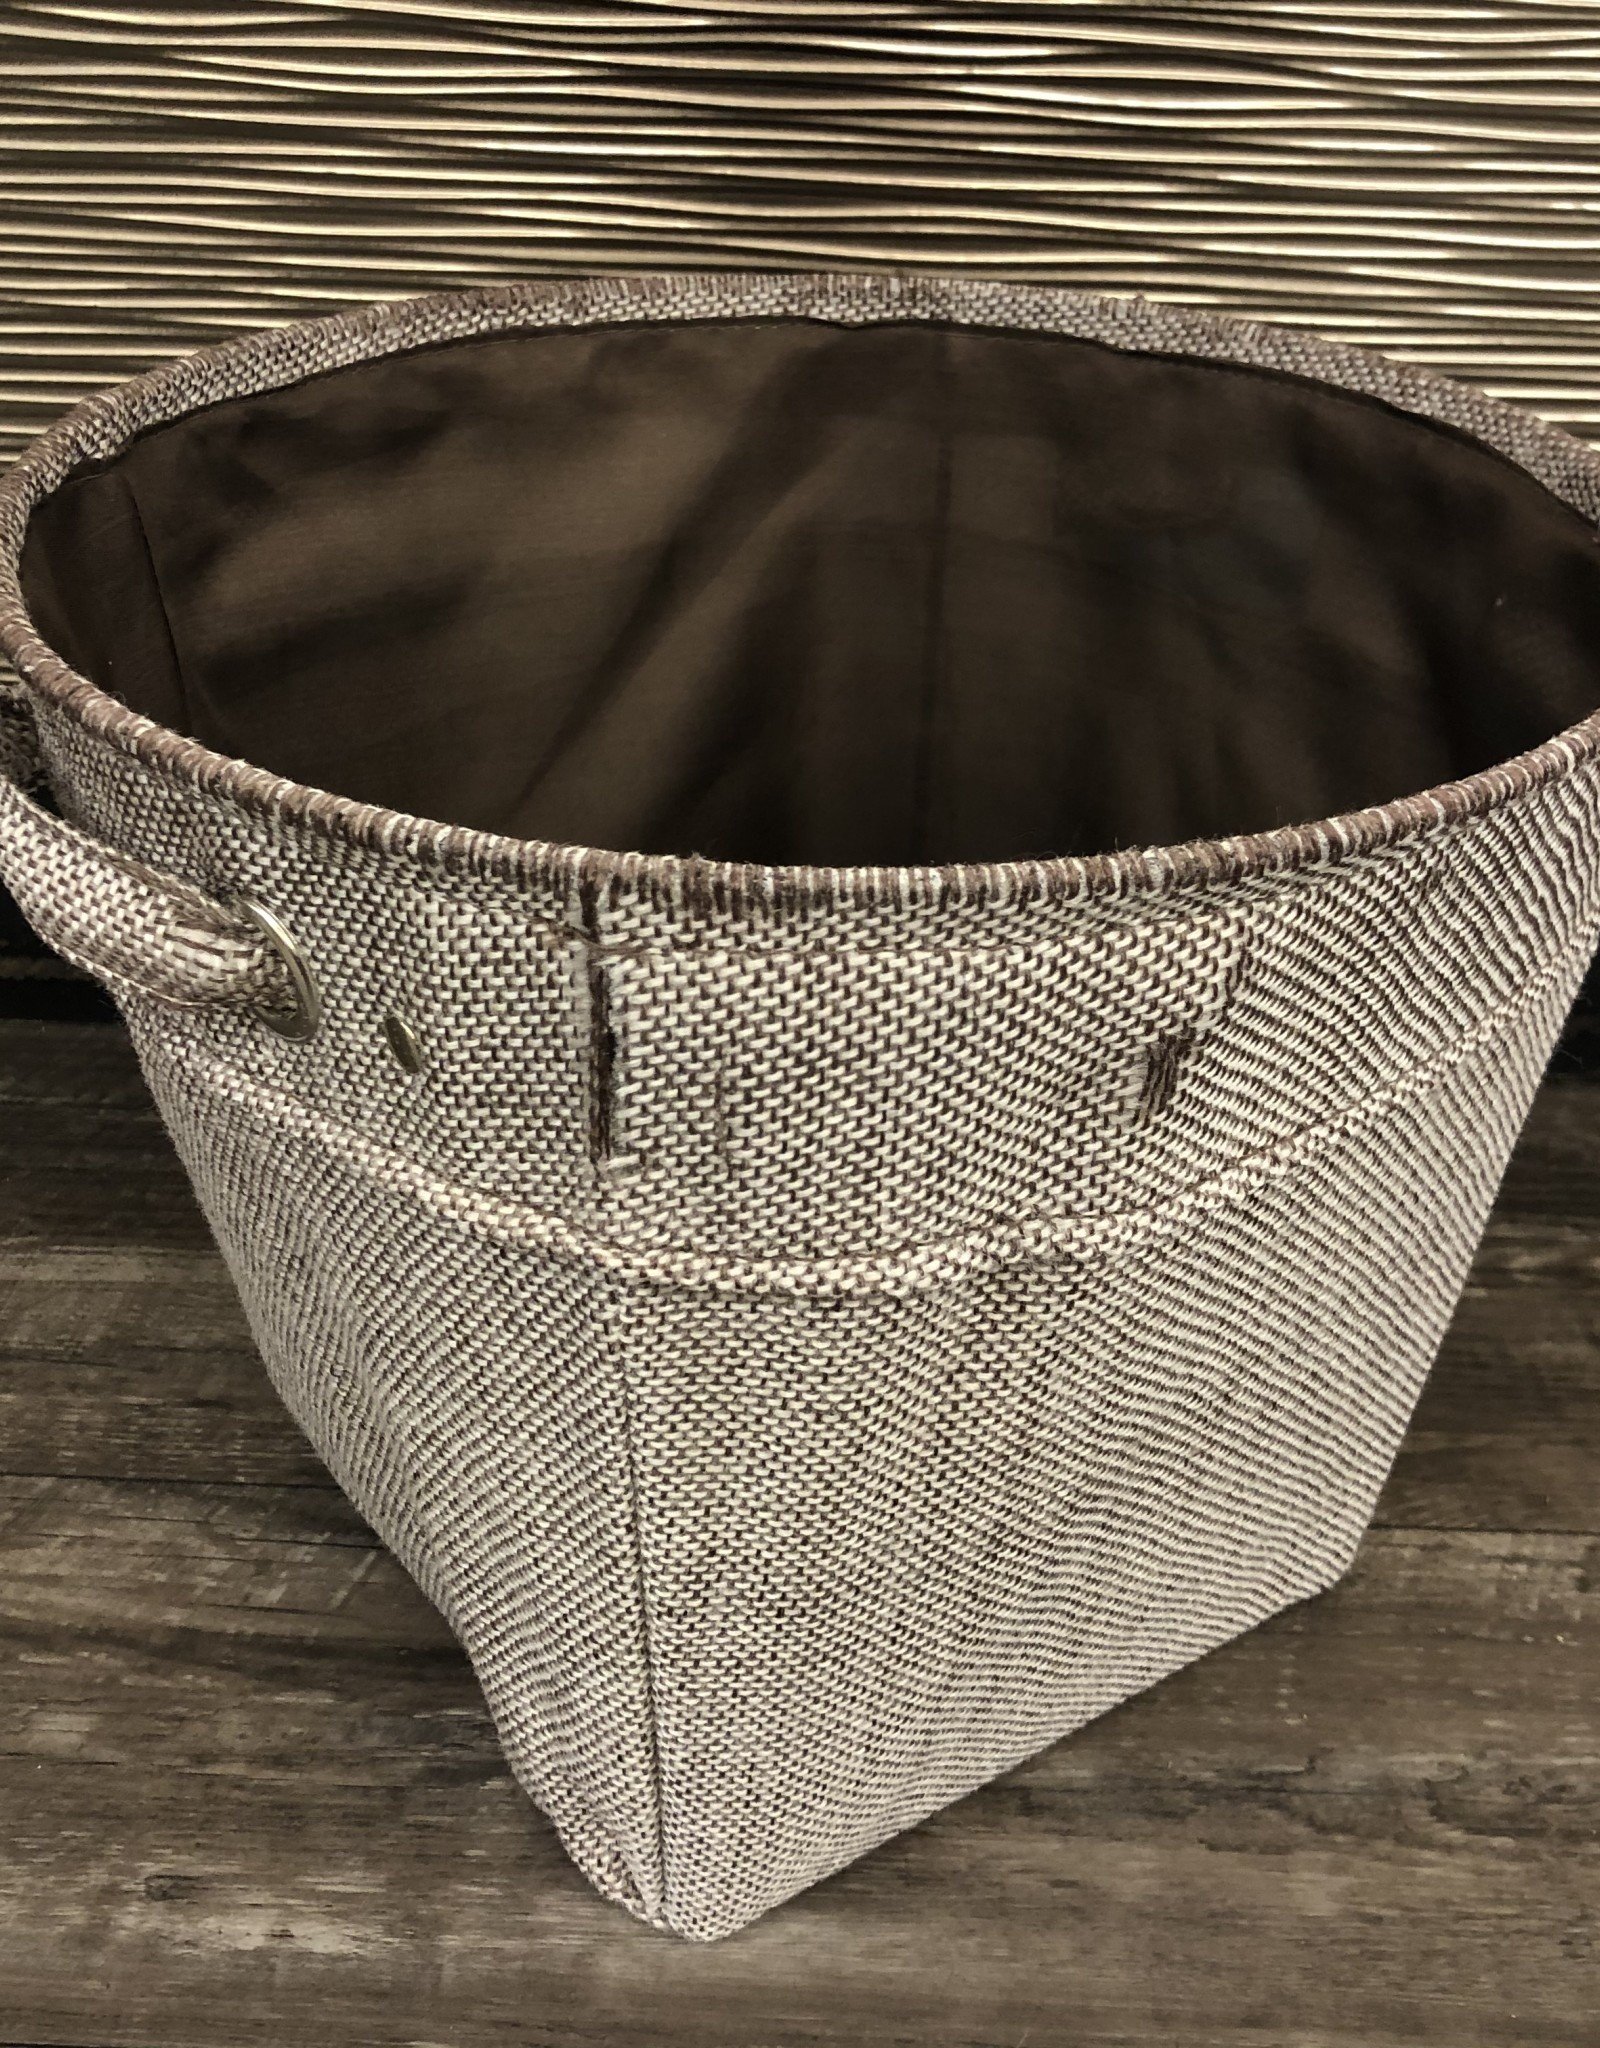 Cathay Basket Cathay Storage Round Brown